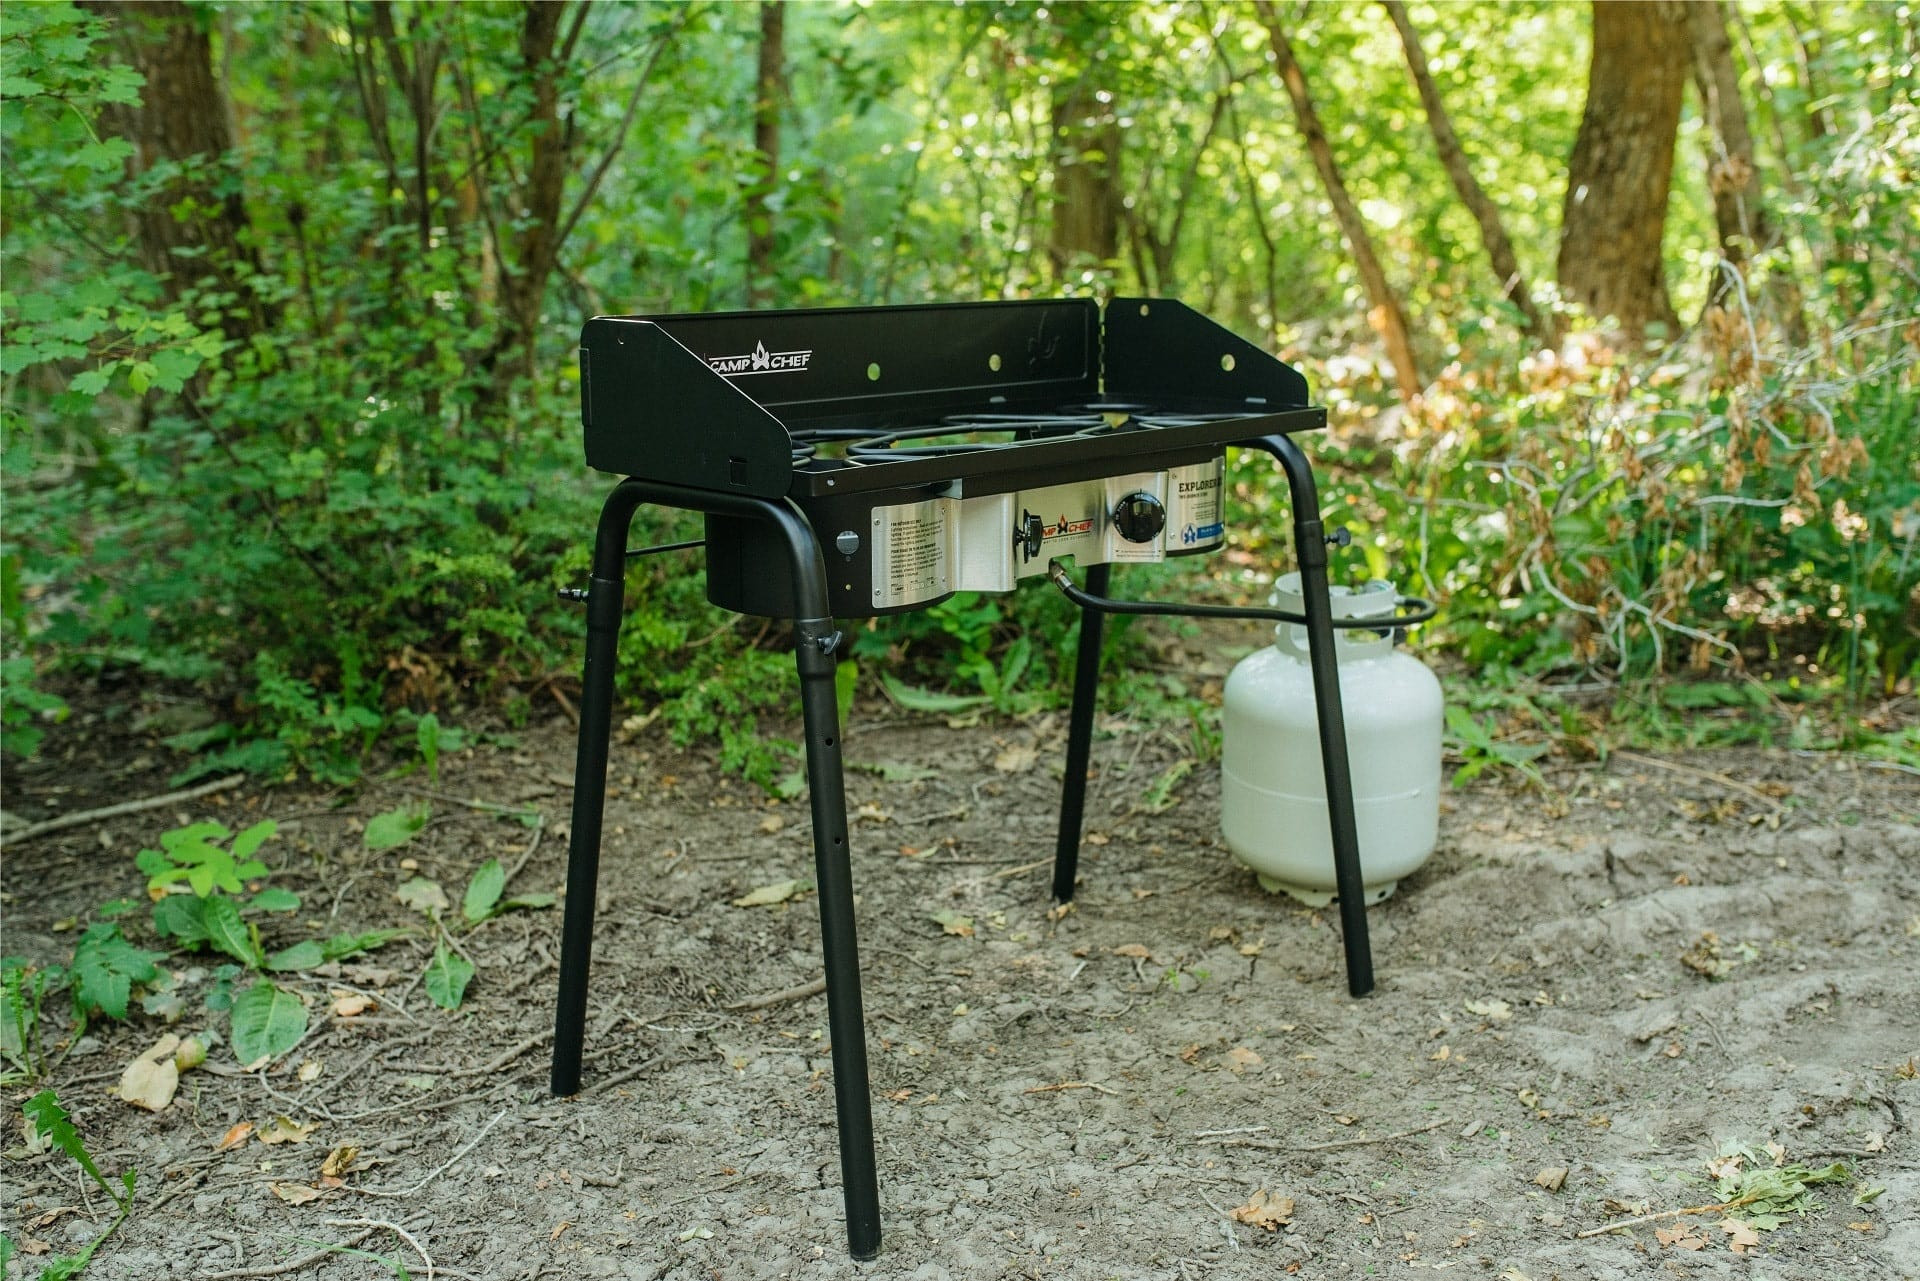 Camp Chef Explorer 14 Double Stove World of Camping